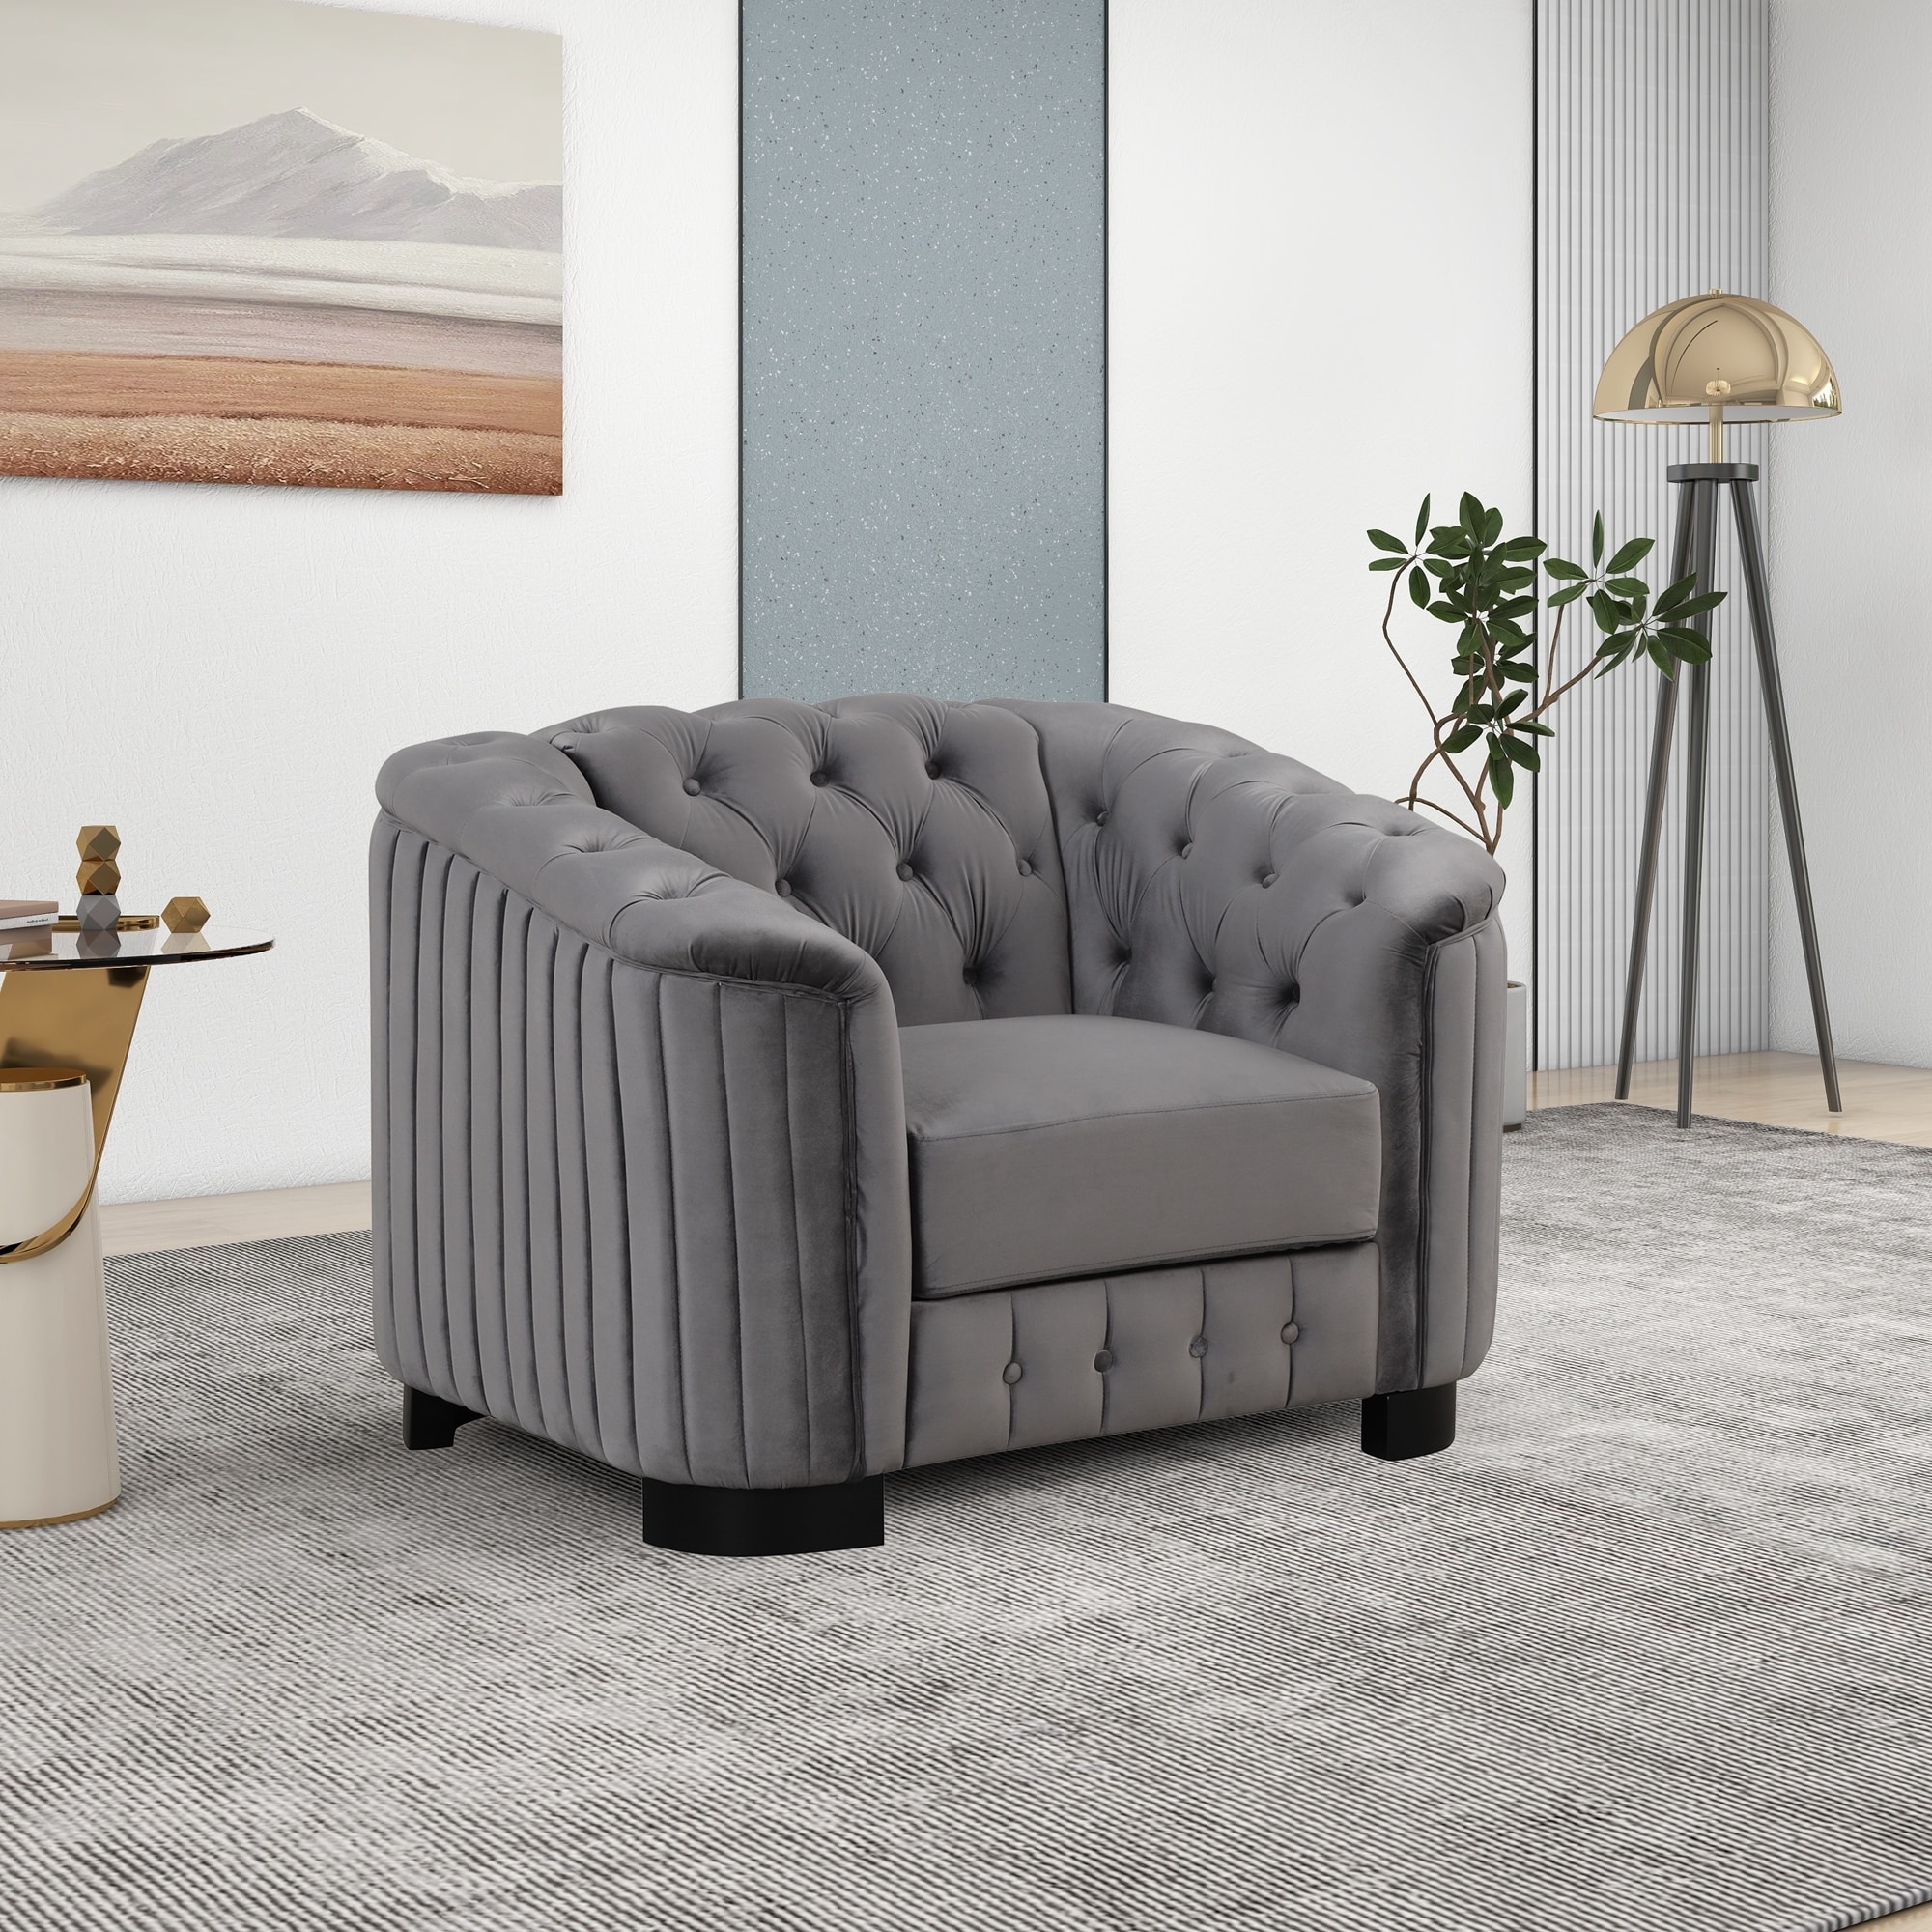 https://ak1.ostkcdn.com/images/products/is/images/direct/680929fa248efd46c23d6b2e8c1a2edc35eab9f0/41.5%22-Velvet-Upholstered-Accent-Sofa%2C-Pillow-Top-Arm-Sofa-Chair-with-Thick-Removable-Seat-Cushion%2C-Deep-Cushions-Sofa.jpg